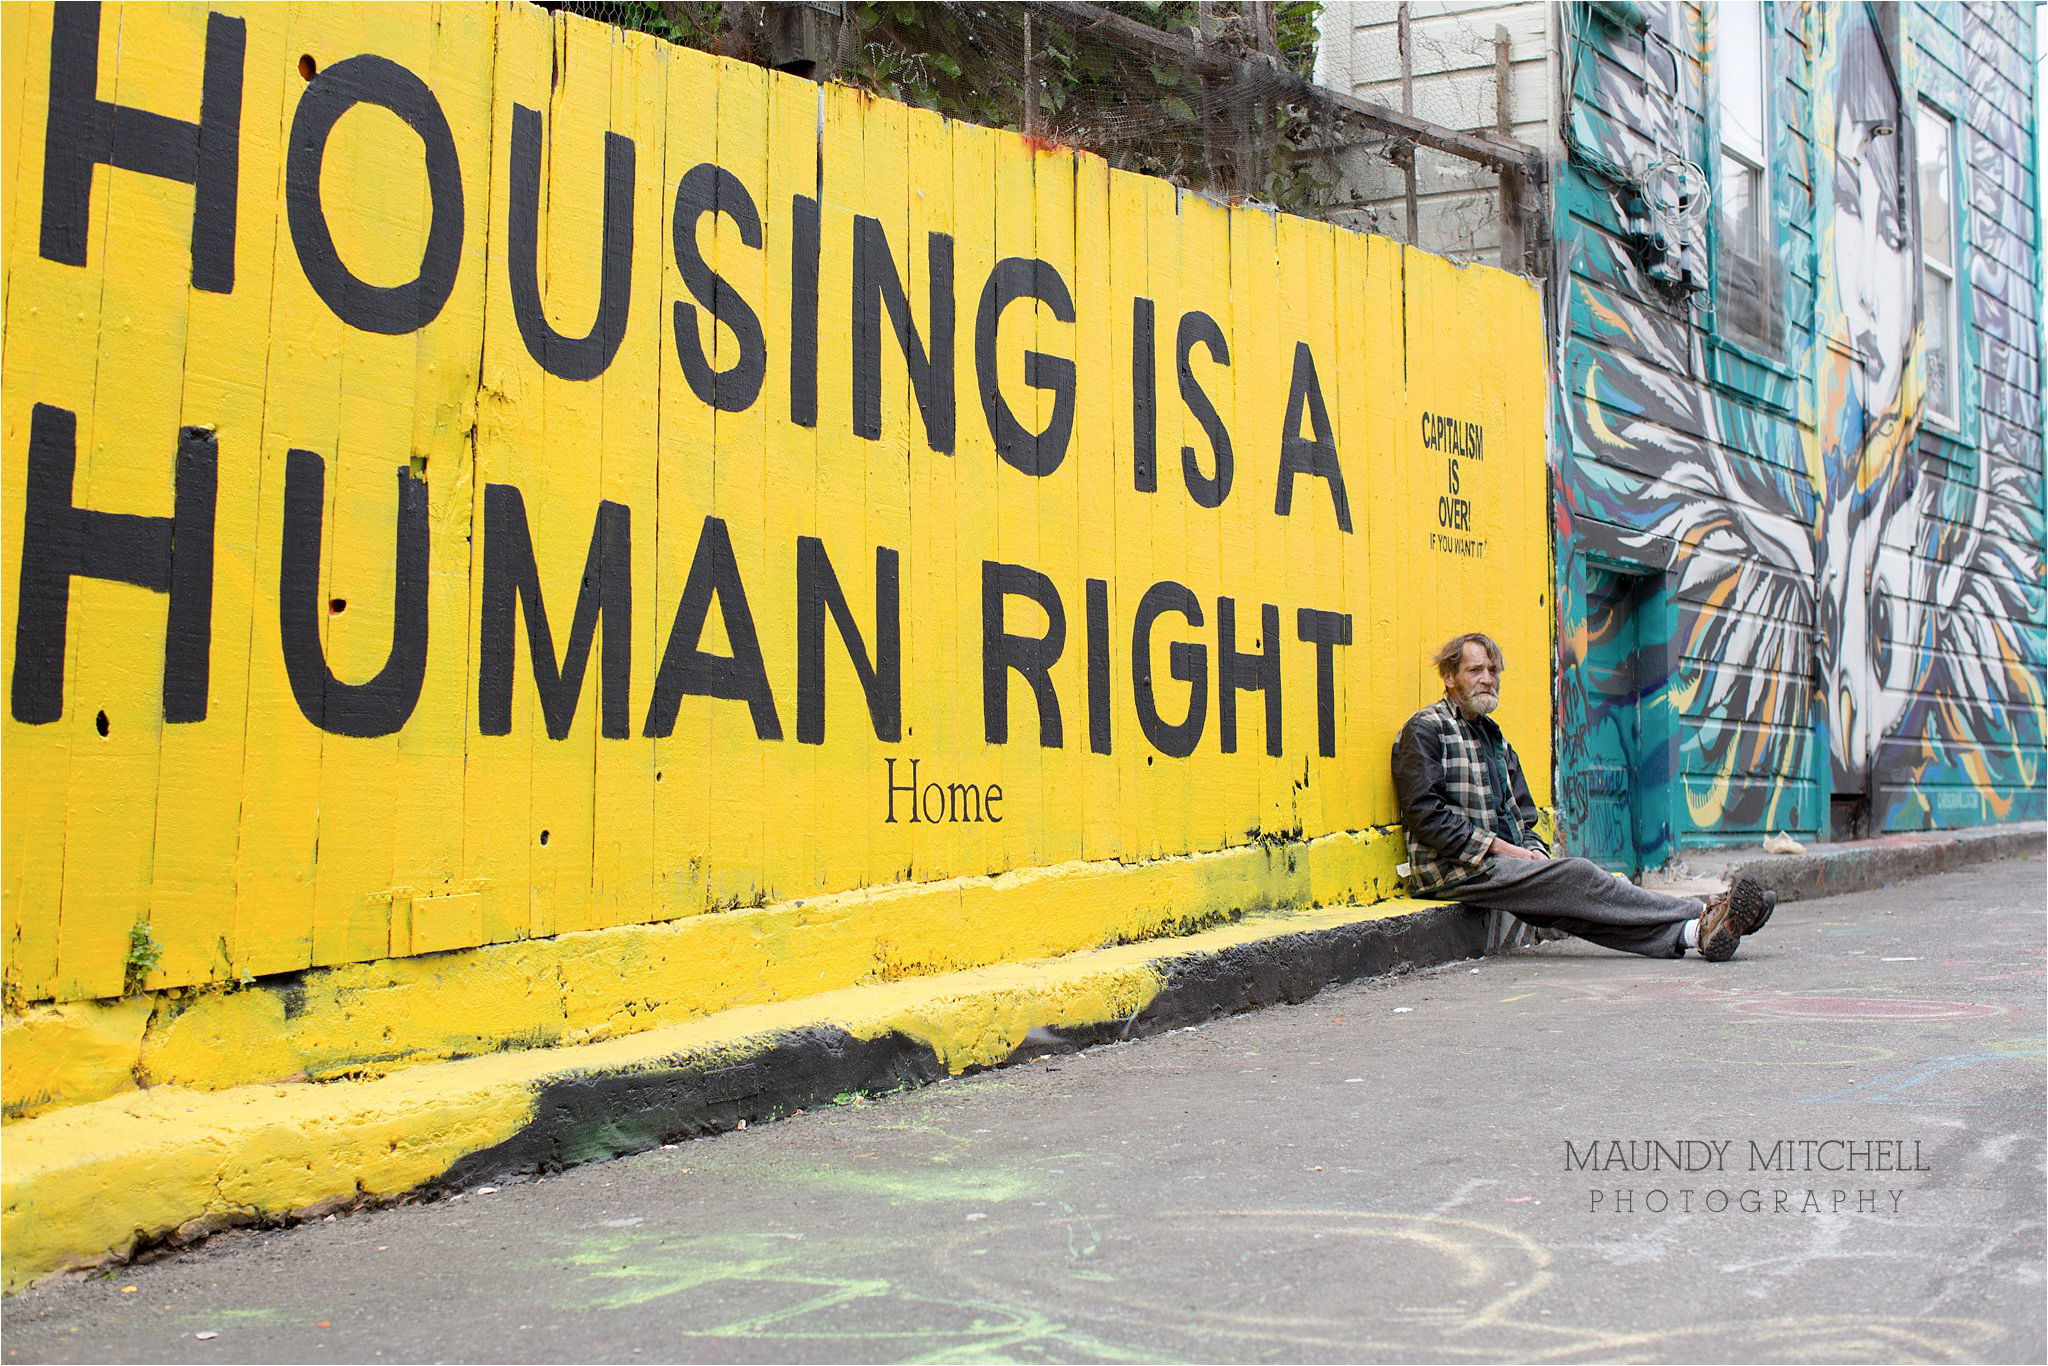 Homeless Man Sitting by Human Rights Mural